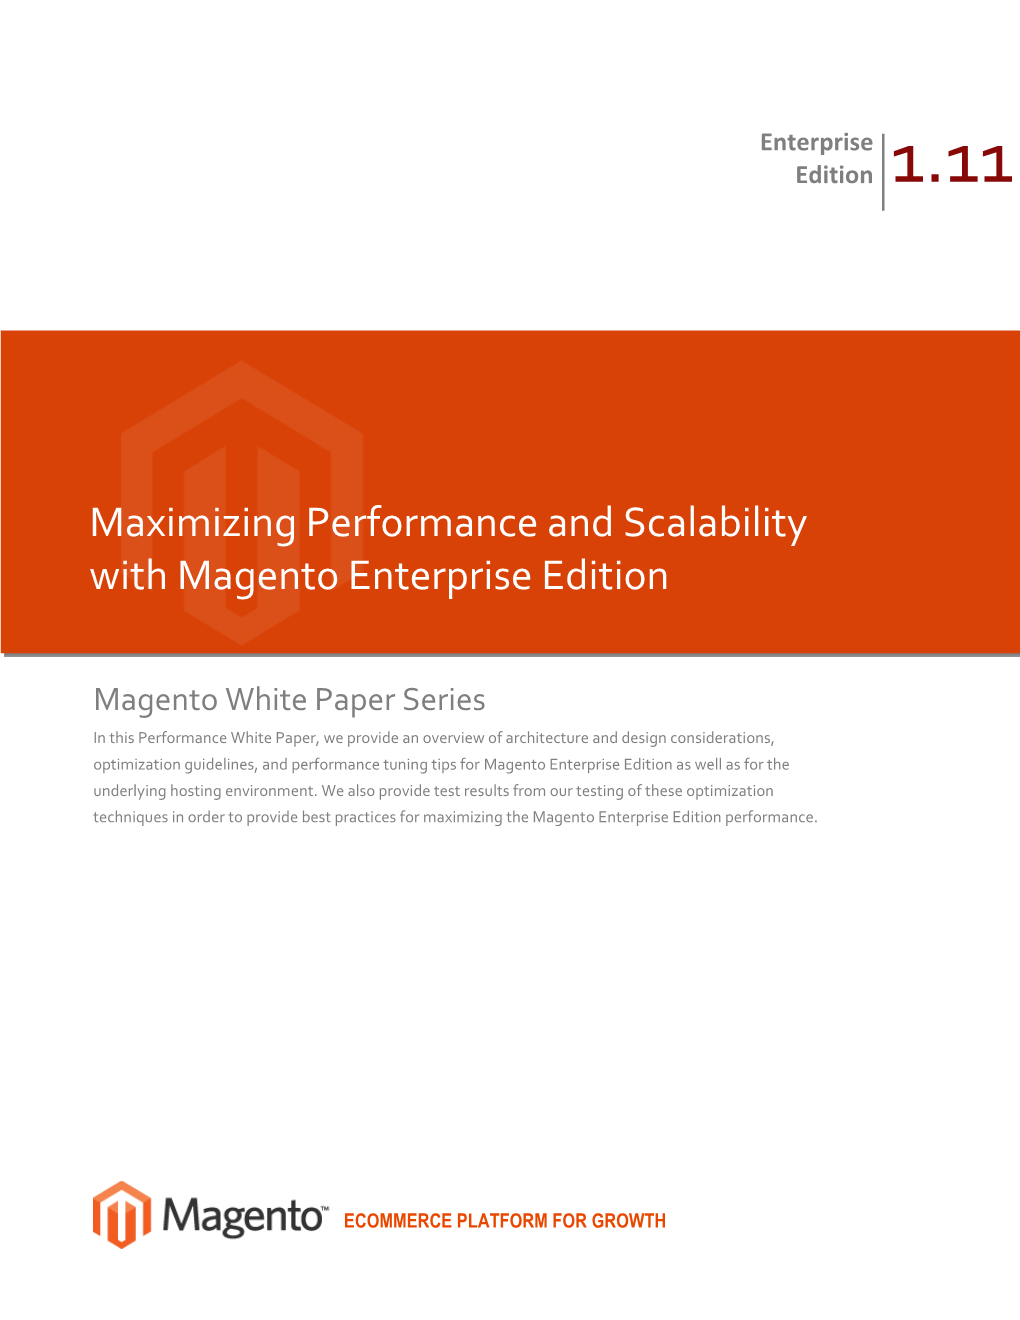 Maximizing Performance and Scalability with Magento Enterprise Edition